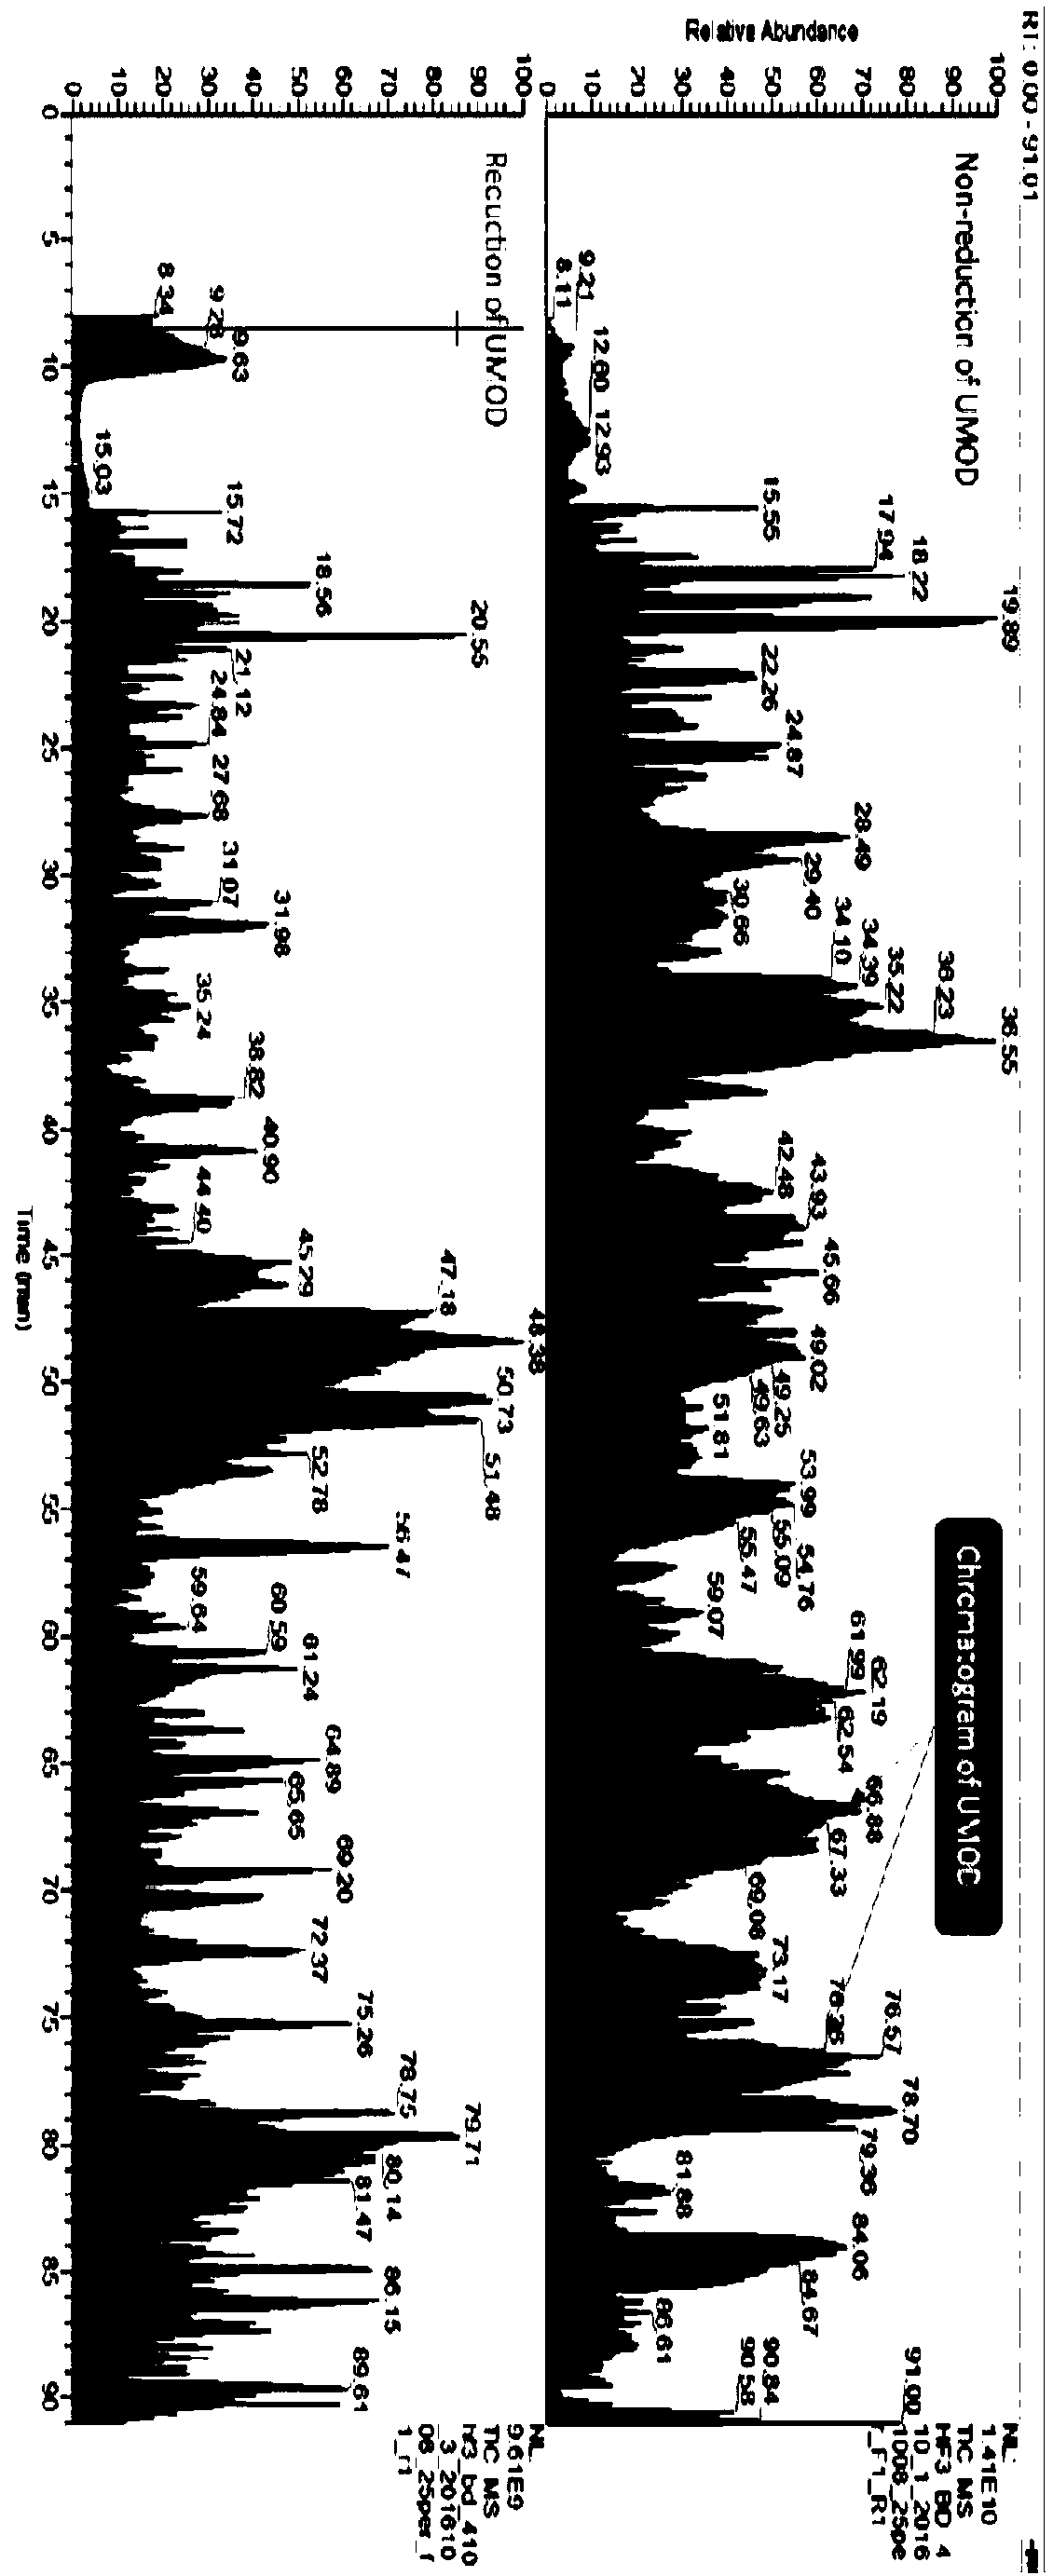 Preparation method of urinary protein and detection method for urinary proteome